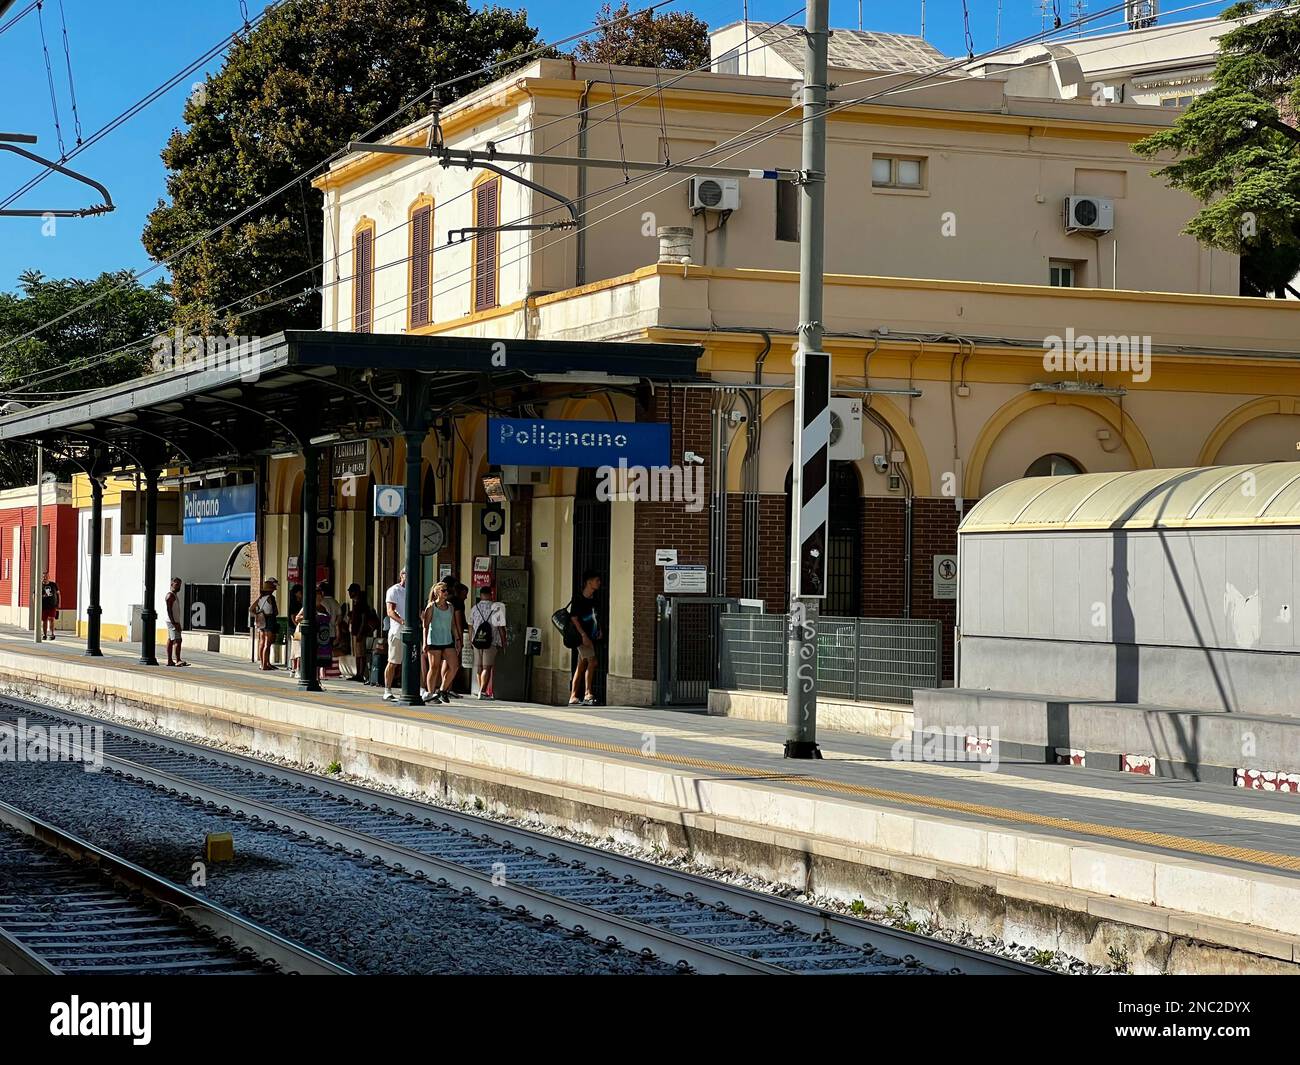 Passengers wait under the canopy at the Polignano Train Station in Polignano a Mare Italy. Stock Photo